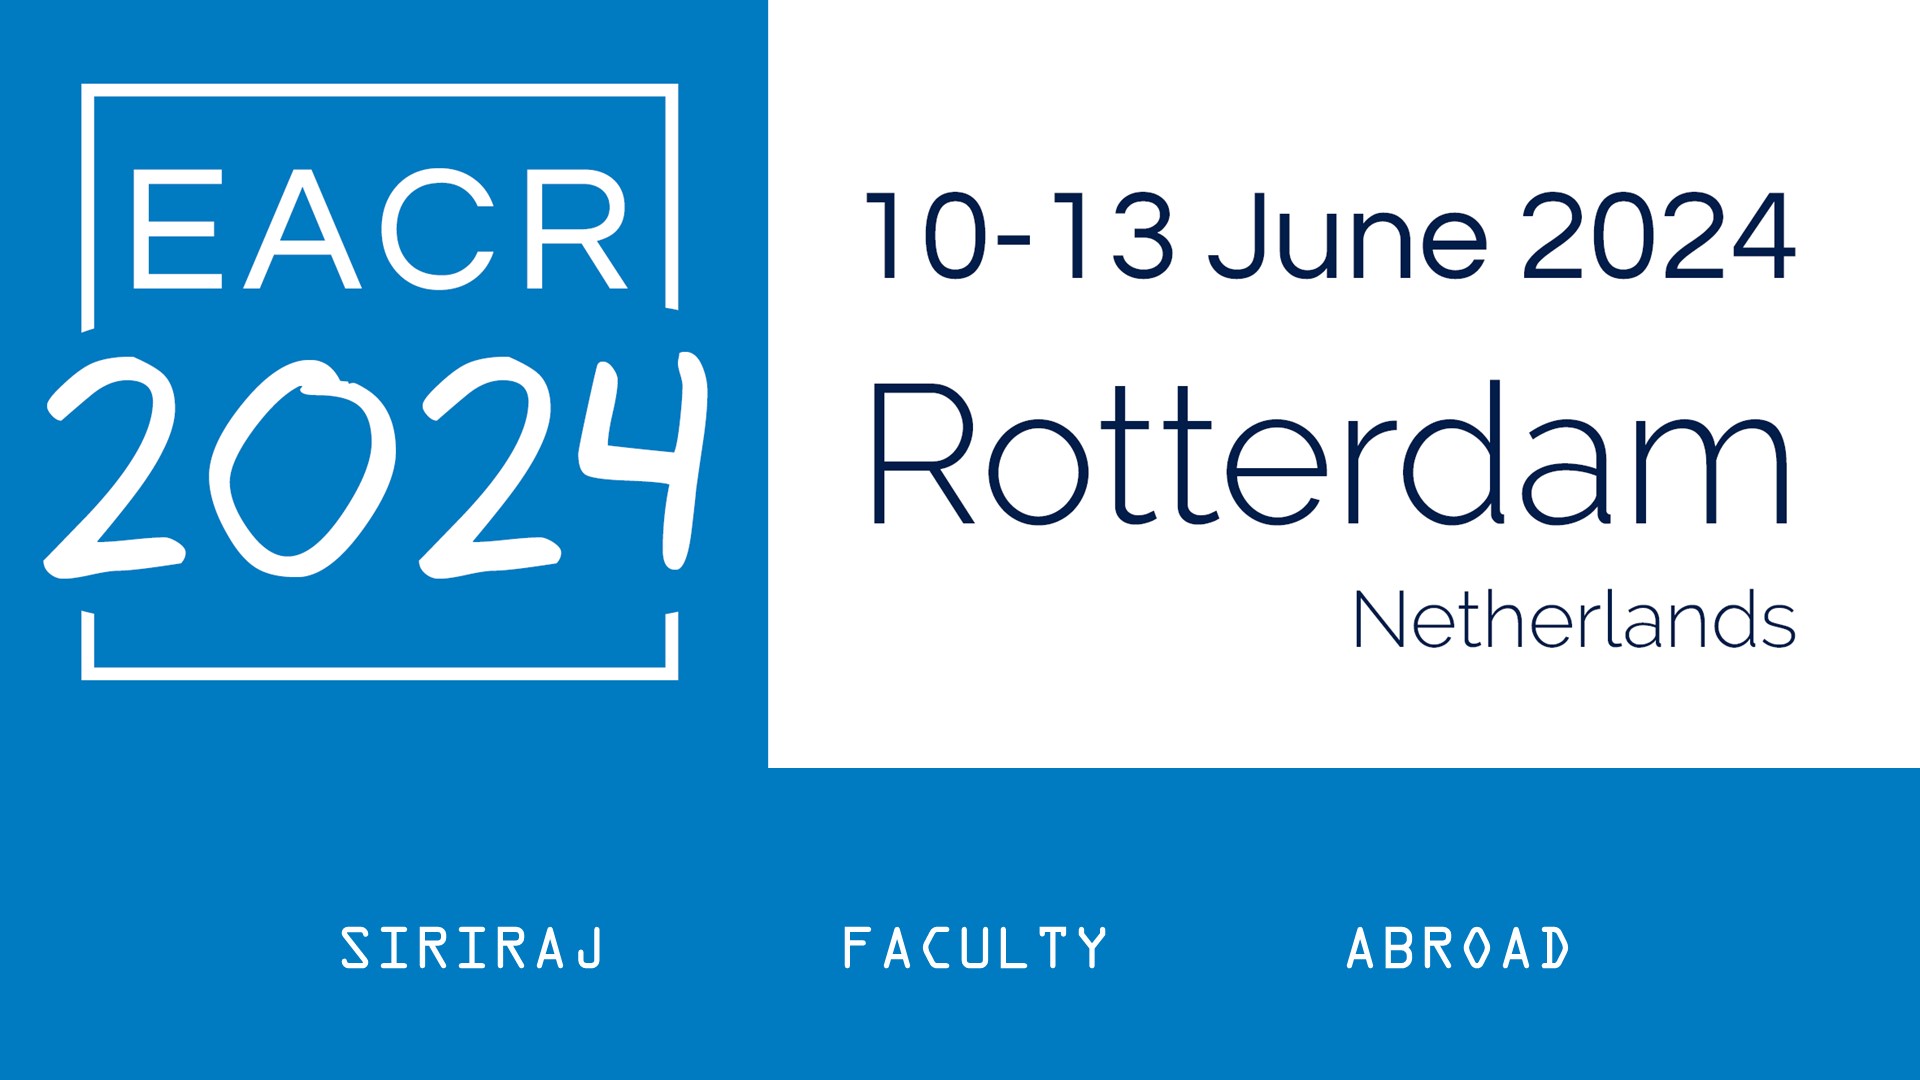 Siriraj Faculty Abroad at the EACR 2024 in the Netherlands